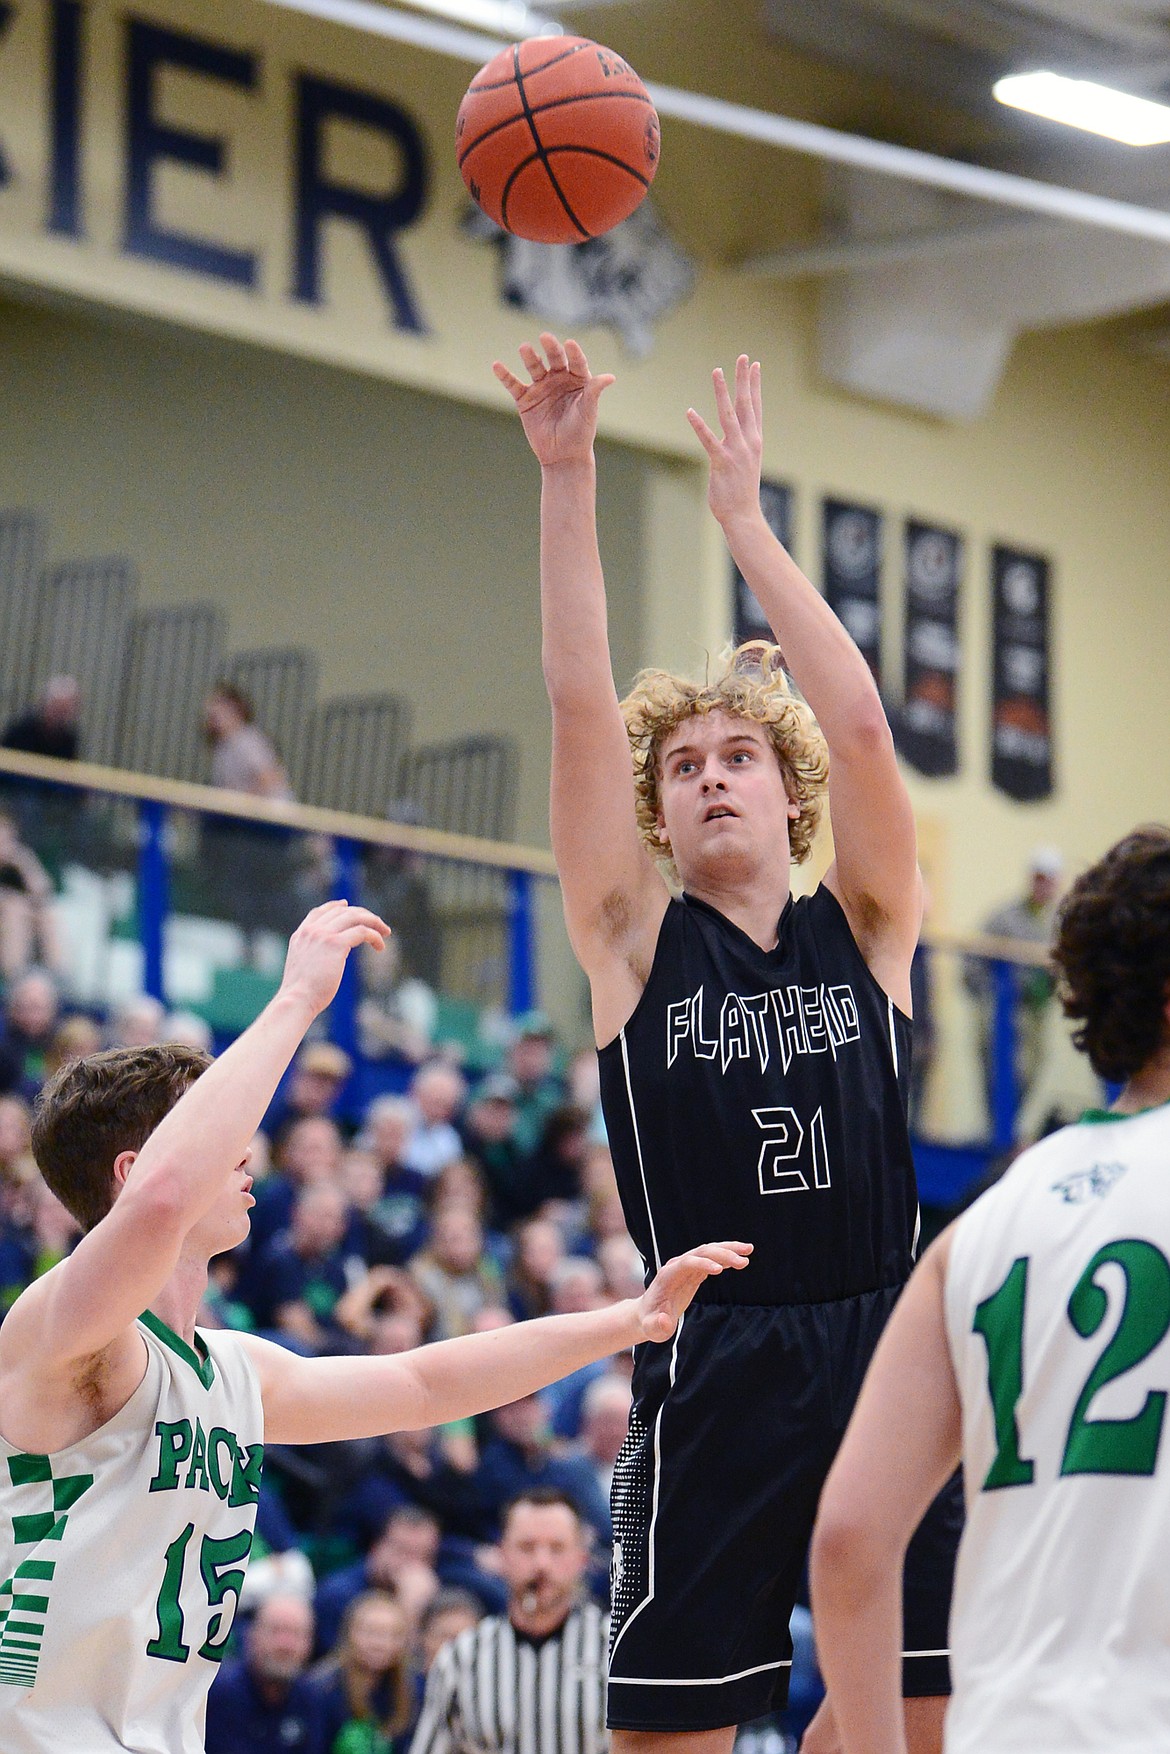 Flathead's Ethan Vandenbosch (21) looks to shoot against Glacier during a crosstown matchup at Glacier High School on Friday. (Casey Kreider/Daily Inter Lake)